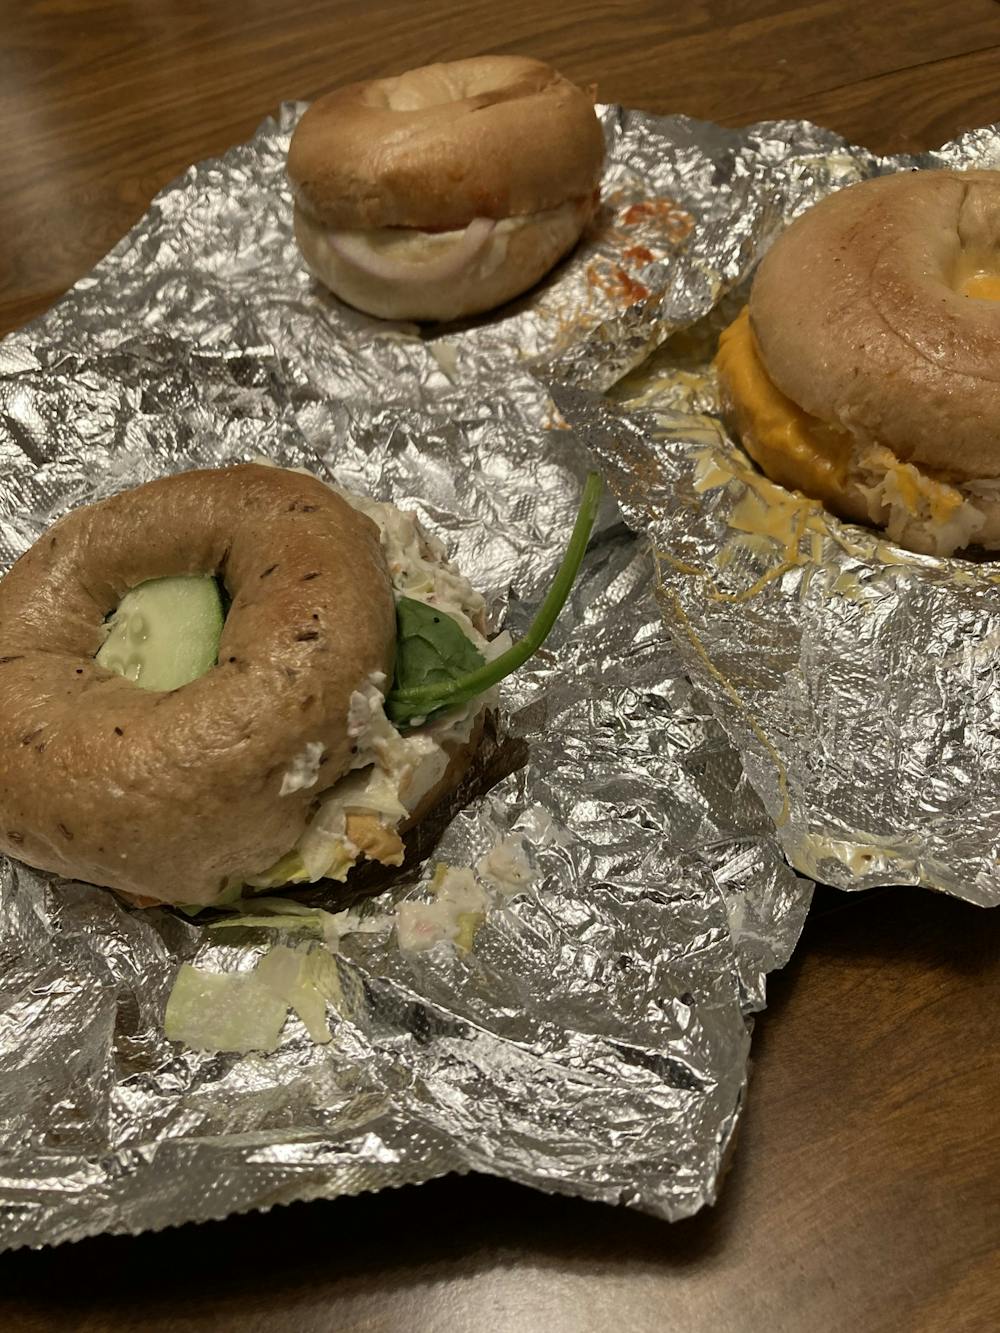 Food Editor Ames Radwan enjoys eating Bagel & Deli. Pictured are B&D’s “Salty Hor” (bottom right), “Kim’s Veggie Pizza” (top center) and “Earth Day” (bottom left) bagels.